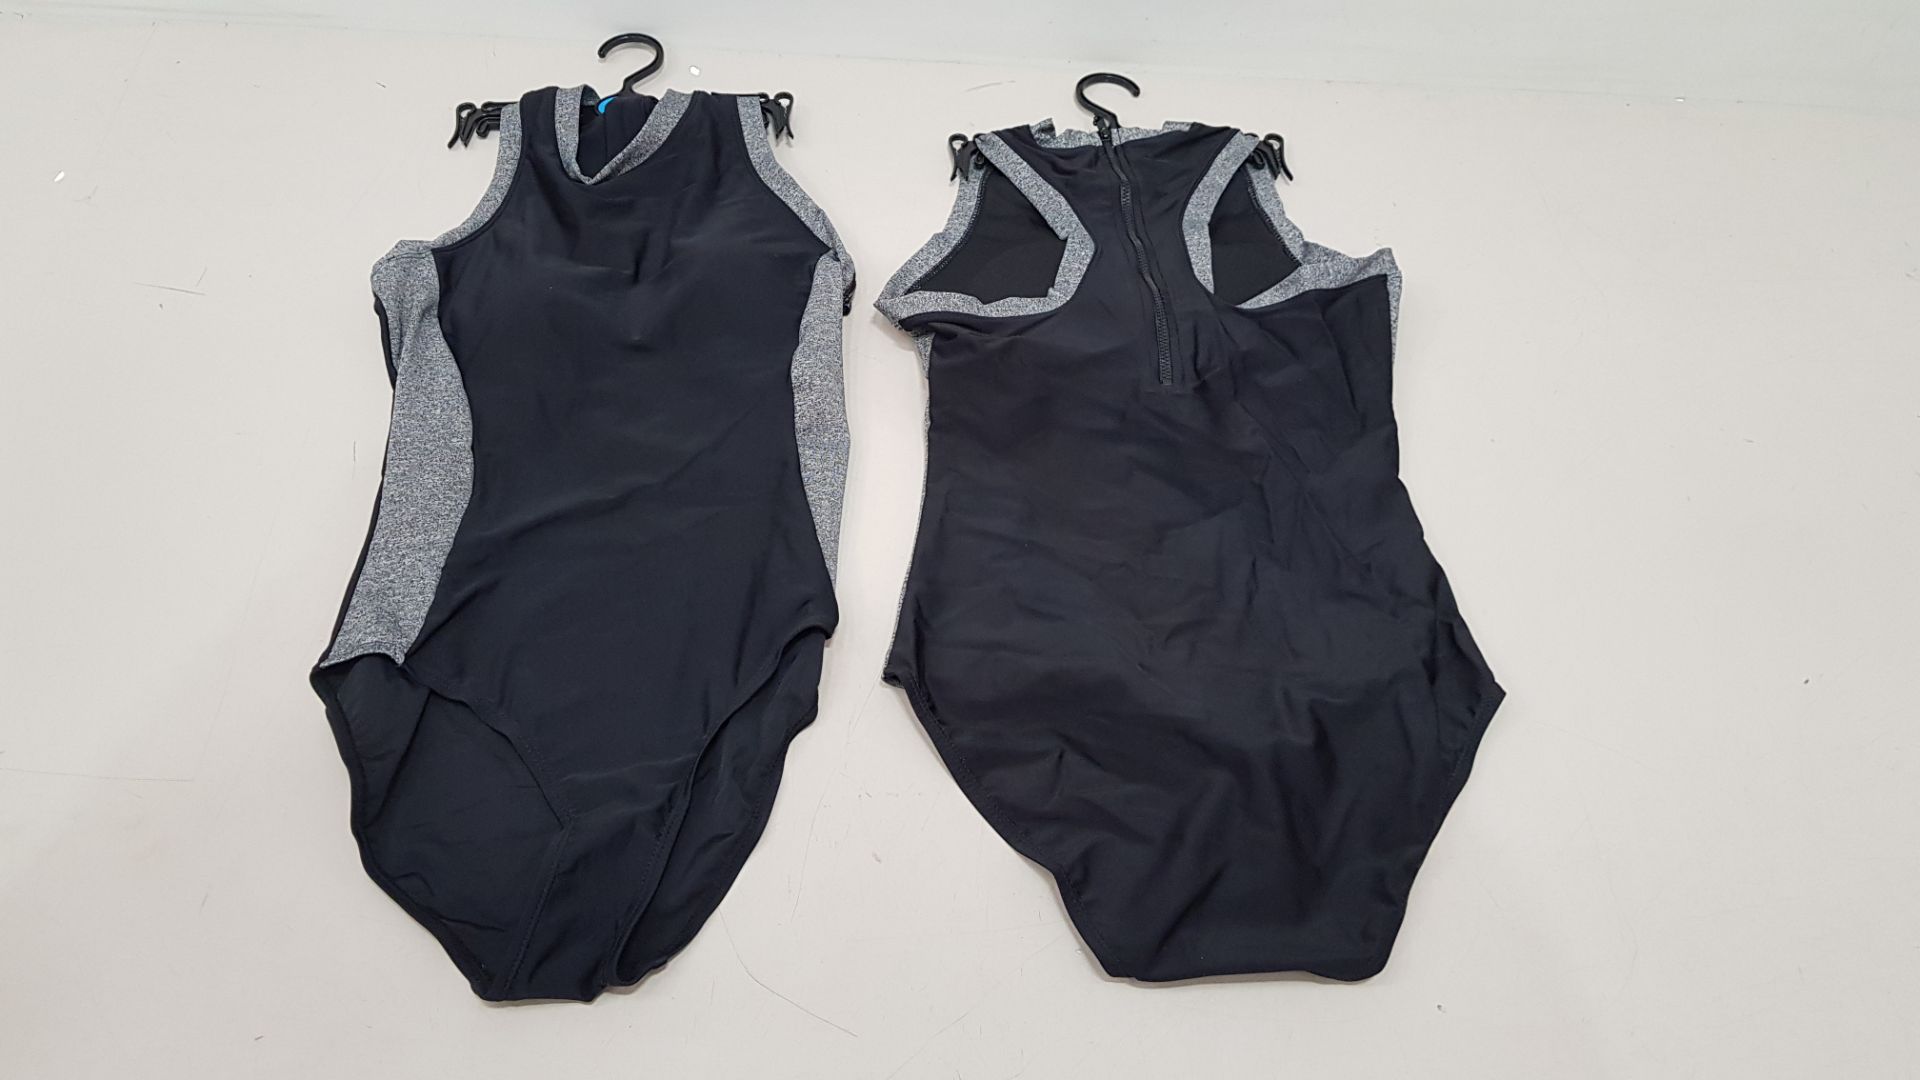 50 X BRAND NEW WORKOUT 1 PIECE SWIMSUITS ZIP UP BACK - IN BLACK AND GREY - IN MIXED SIZES UK 6 / 8 /